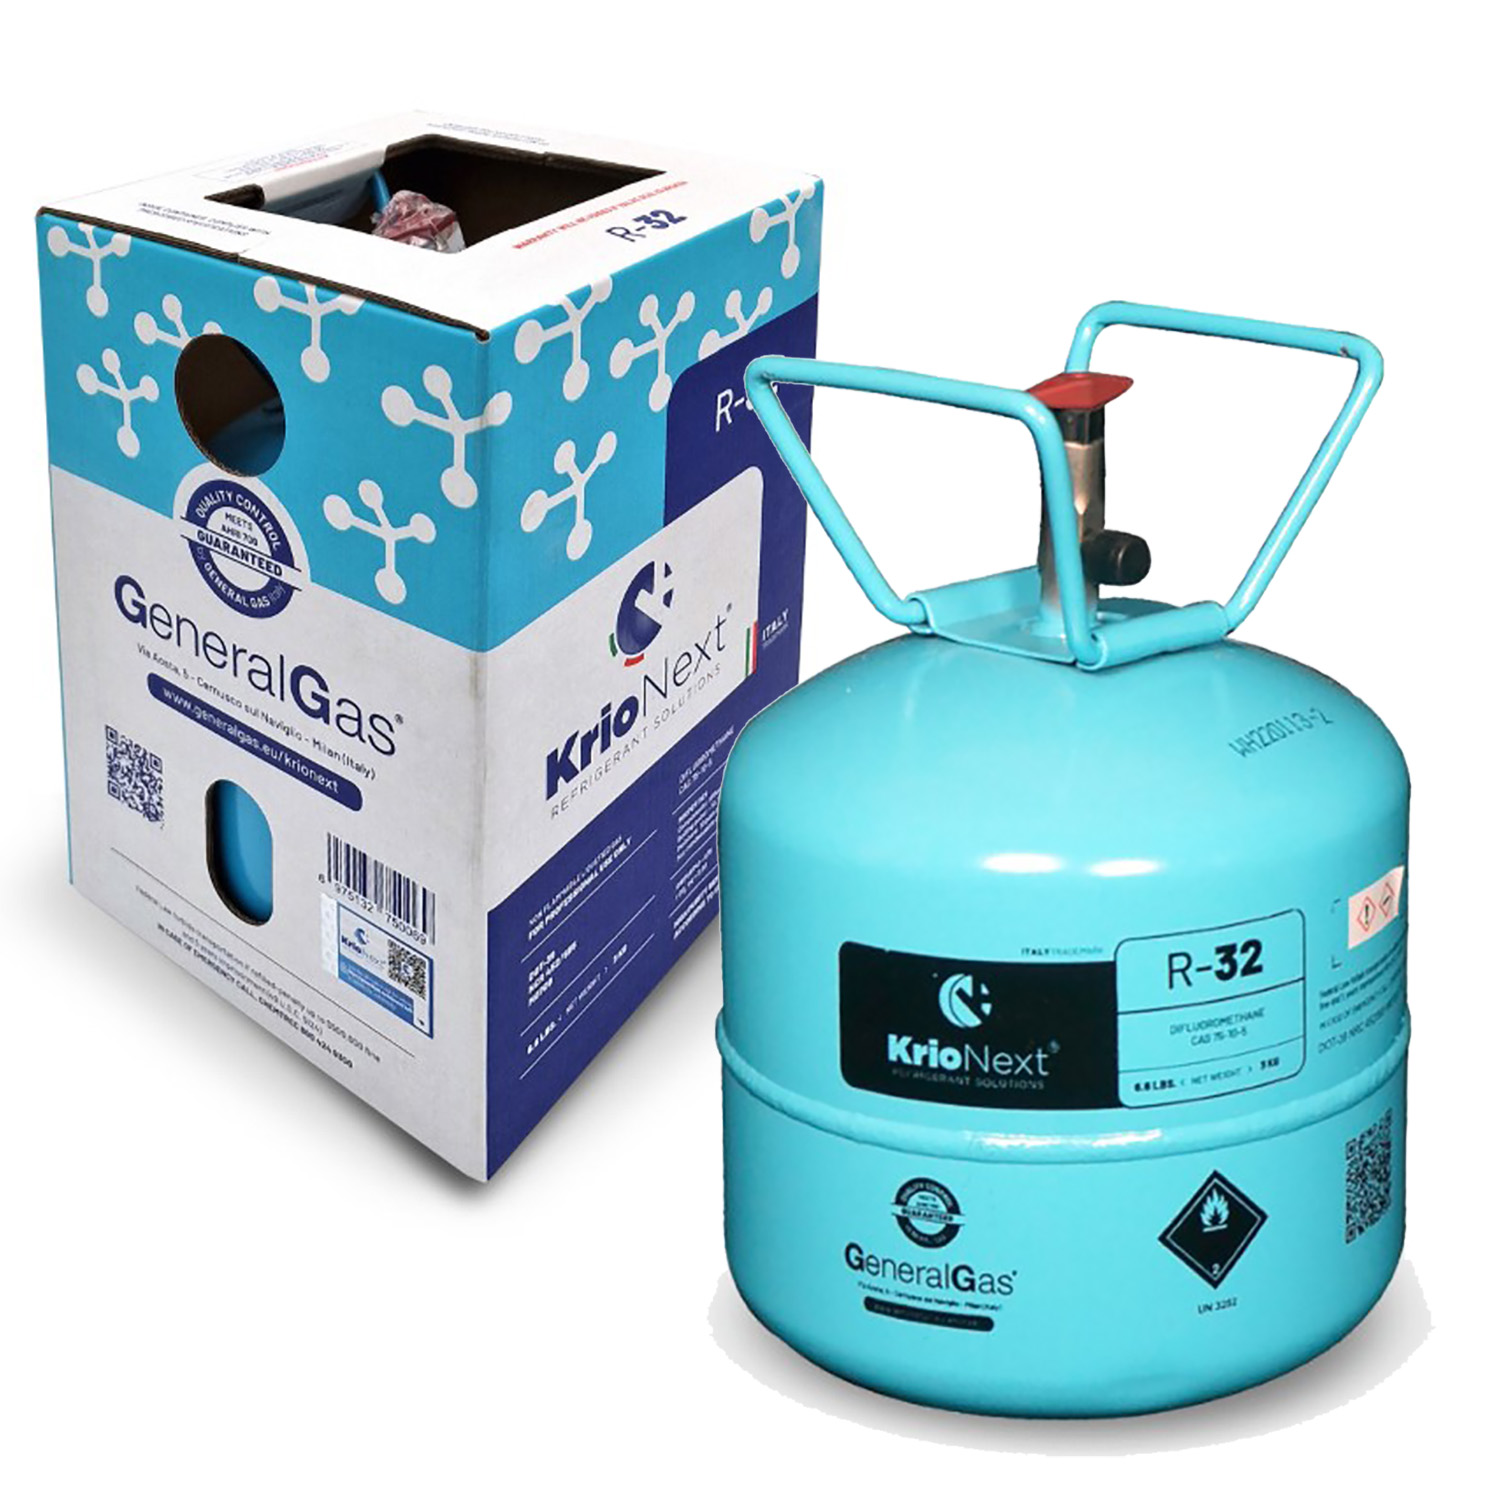 R32 KrioNext® 32 - in GB standard non-refillable cylinder 4,5 Lt / 27 Bar - 3,0 Kg - valve ¼ SAE RH - Quality meets AHRI700-2019 USA standard (guaranteed by lab of GeneralGas Zhejiang Co. LTD.)